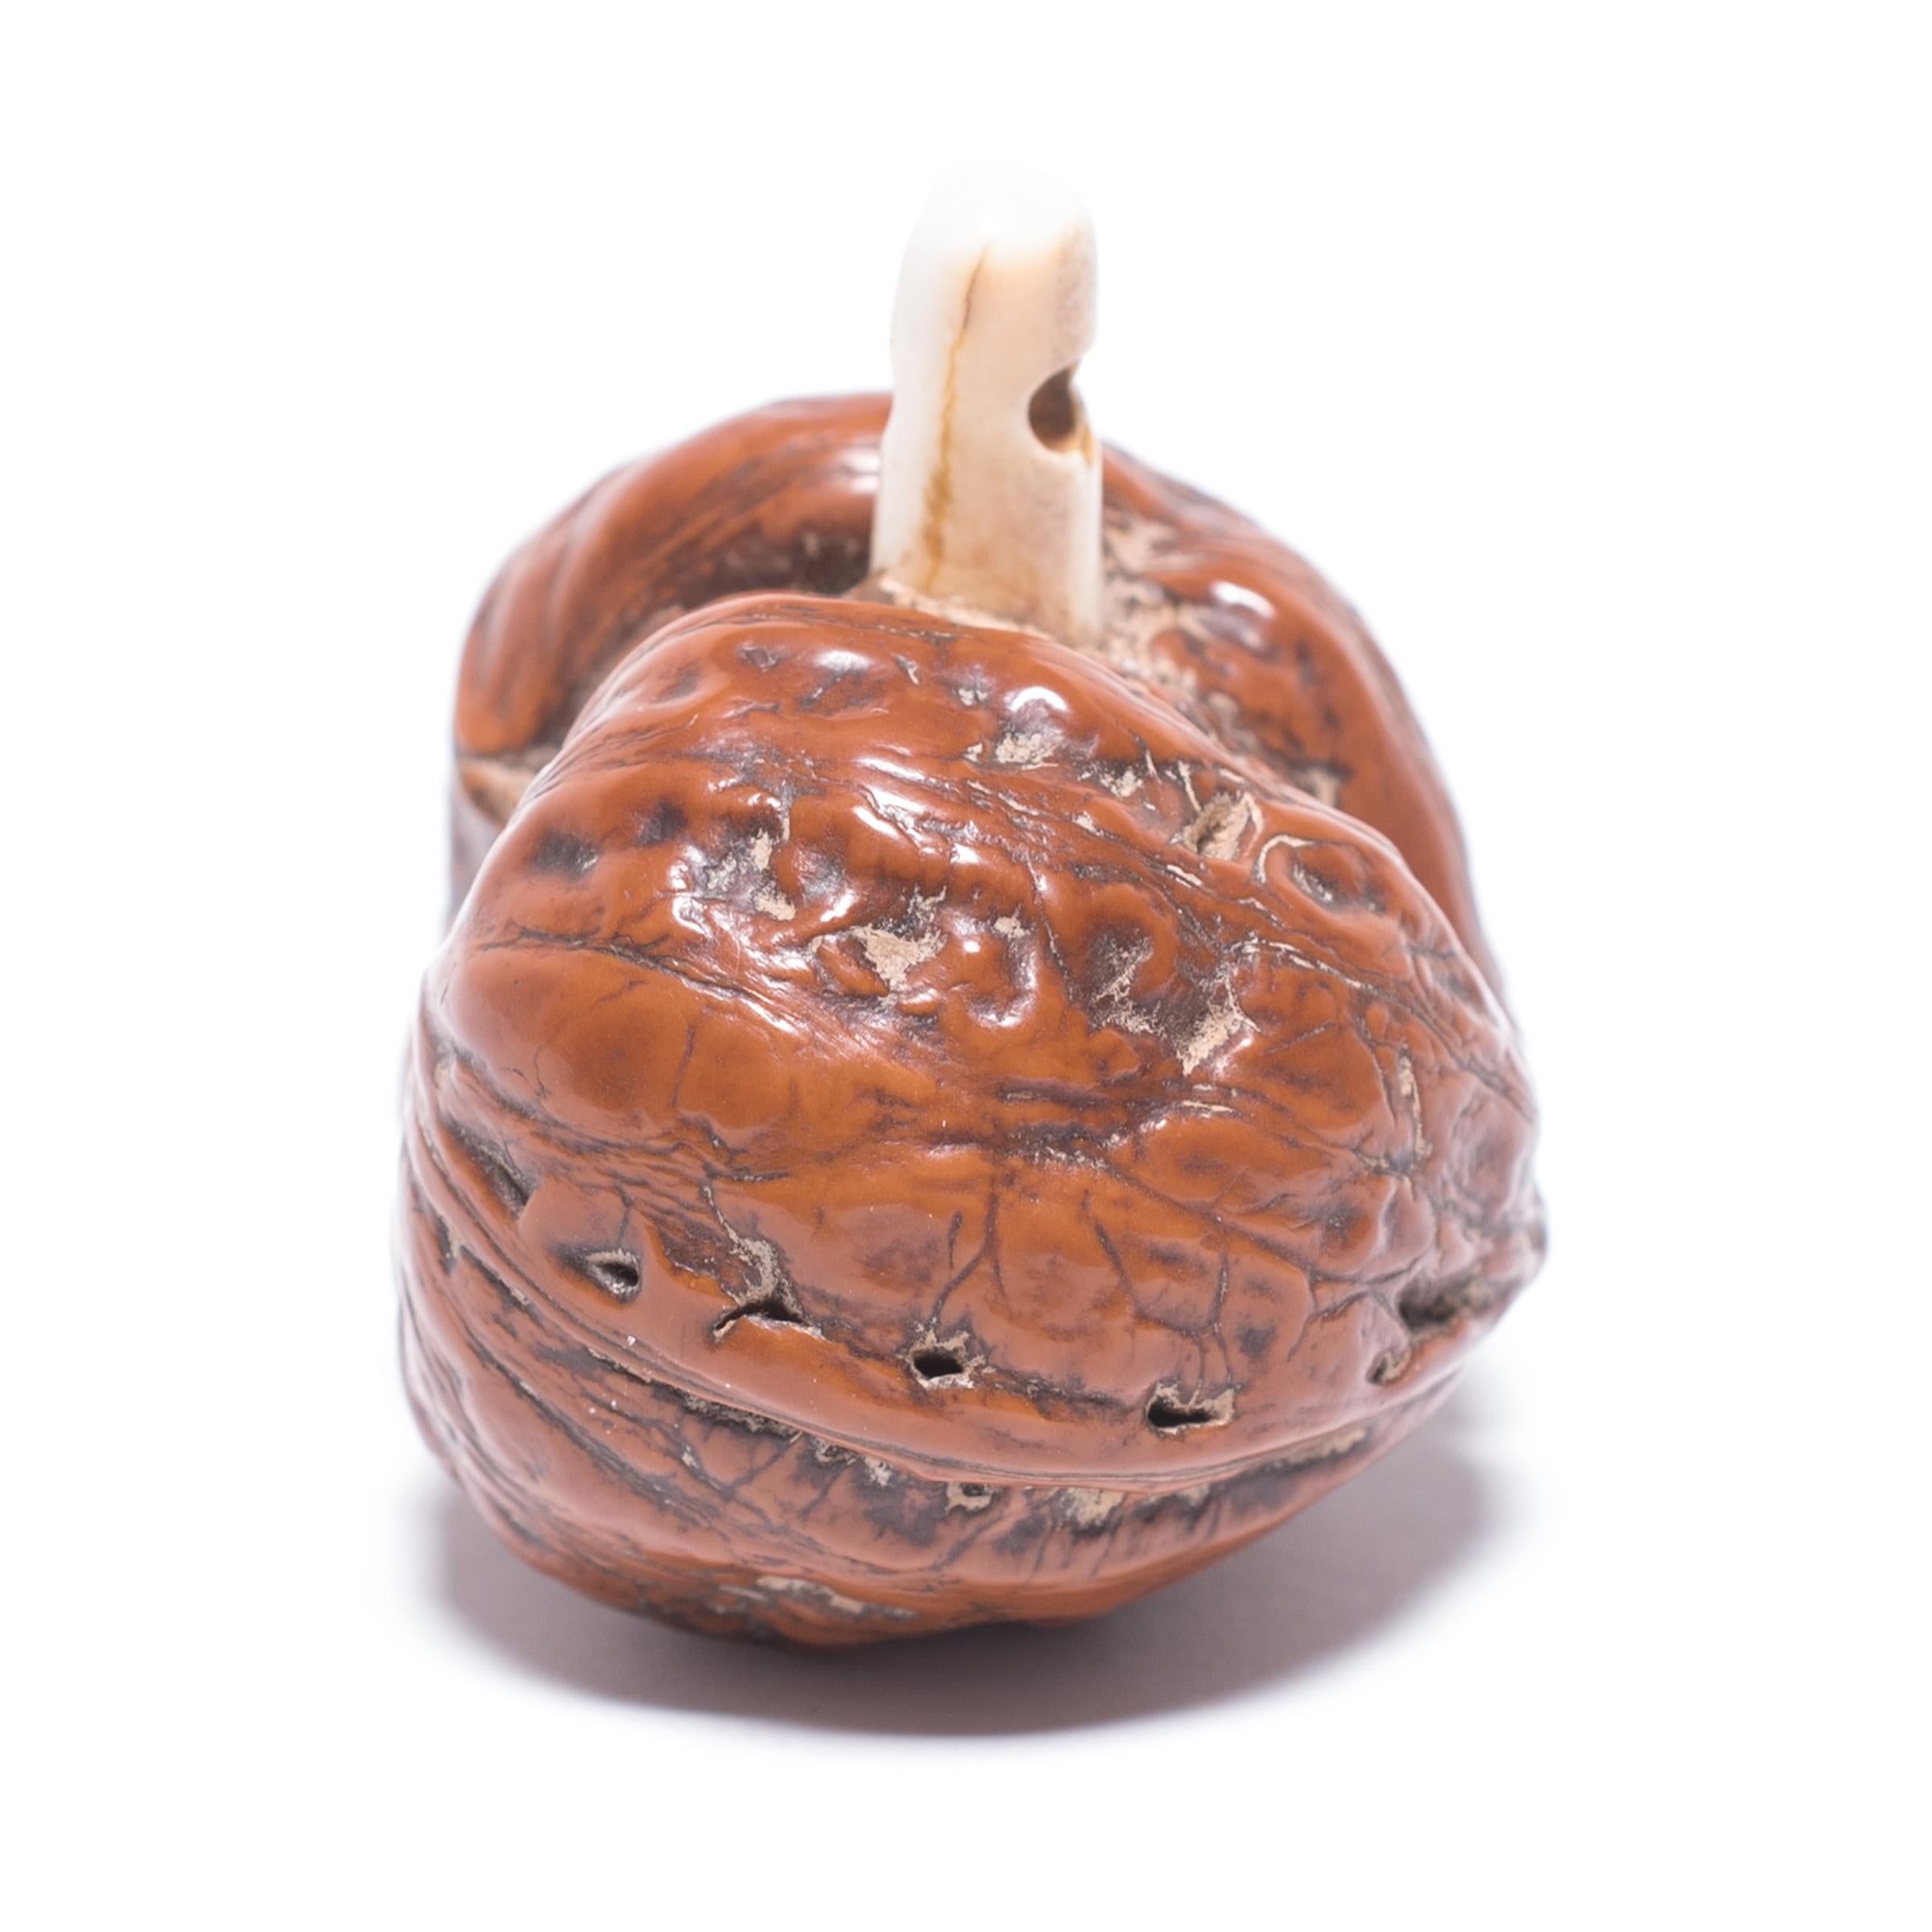 Japanese artisans have long held mastery in the creation of miniature treasures, or netsuke. This gourd netsuke is ingeniously carved out of a walnut shelf with a polished bone spur acting as the stem at the gourd's top. A symbol of divinity, good